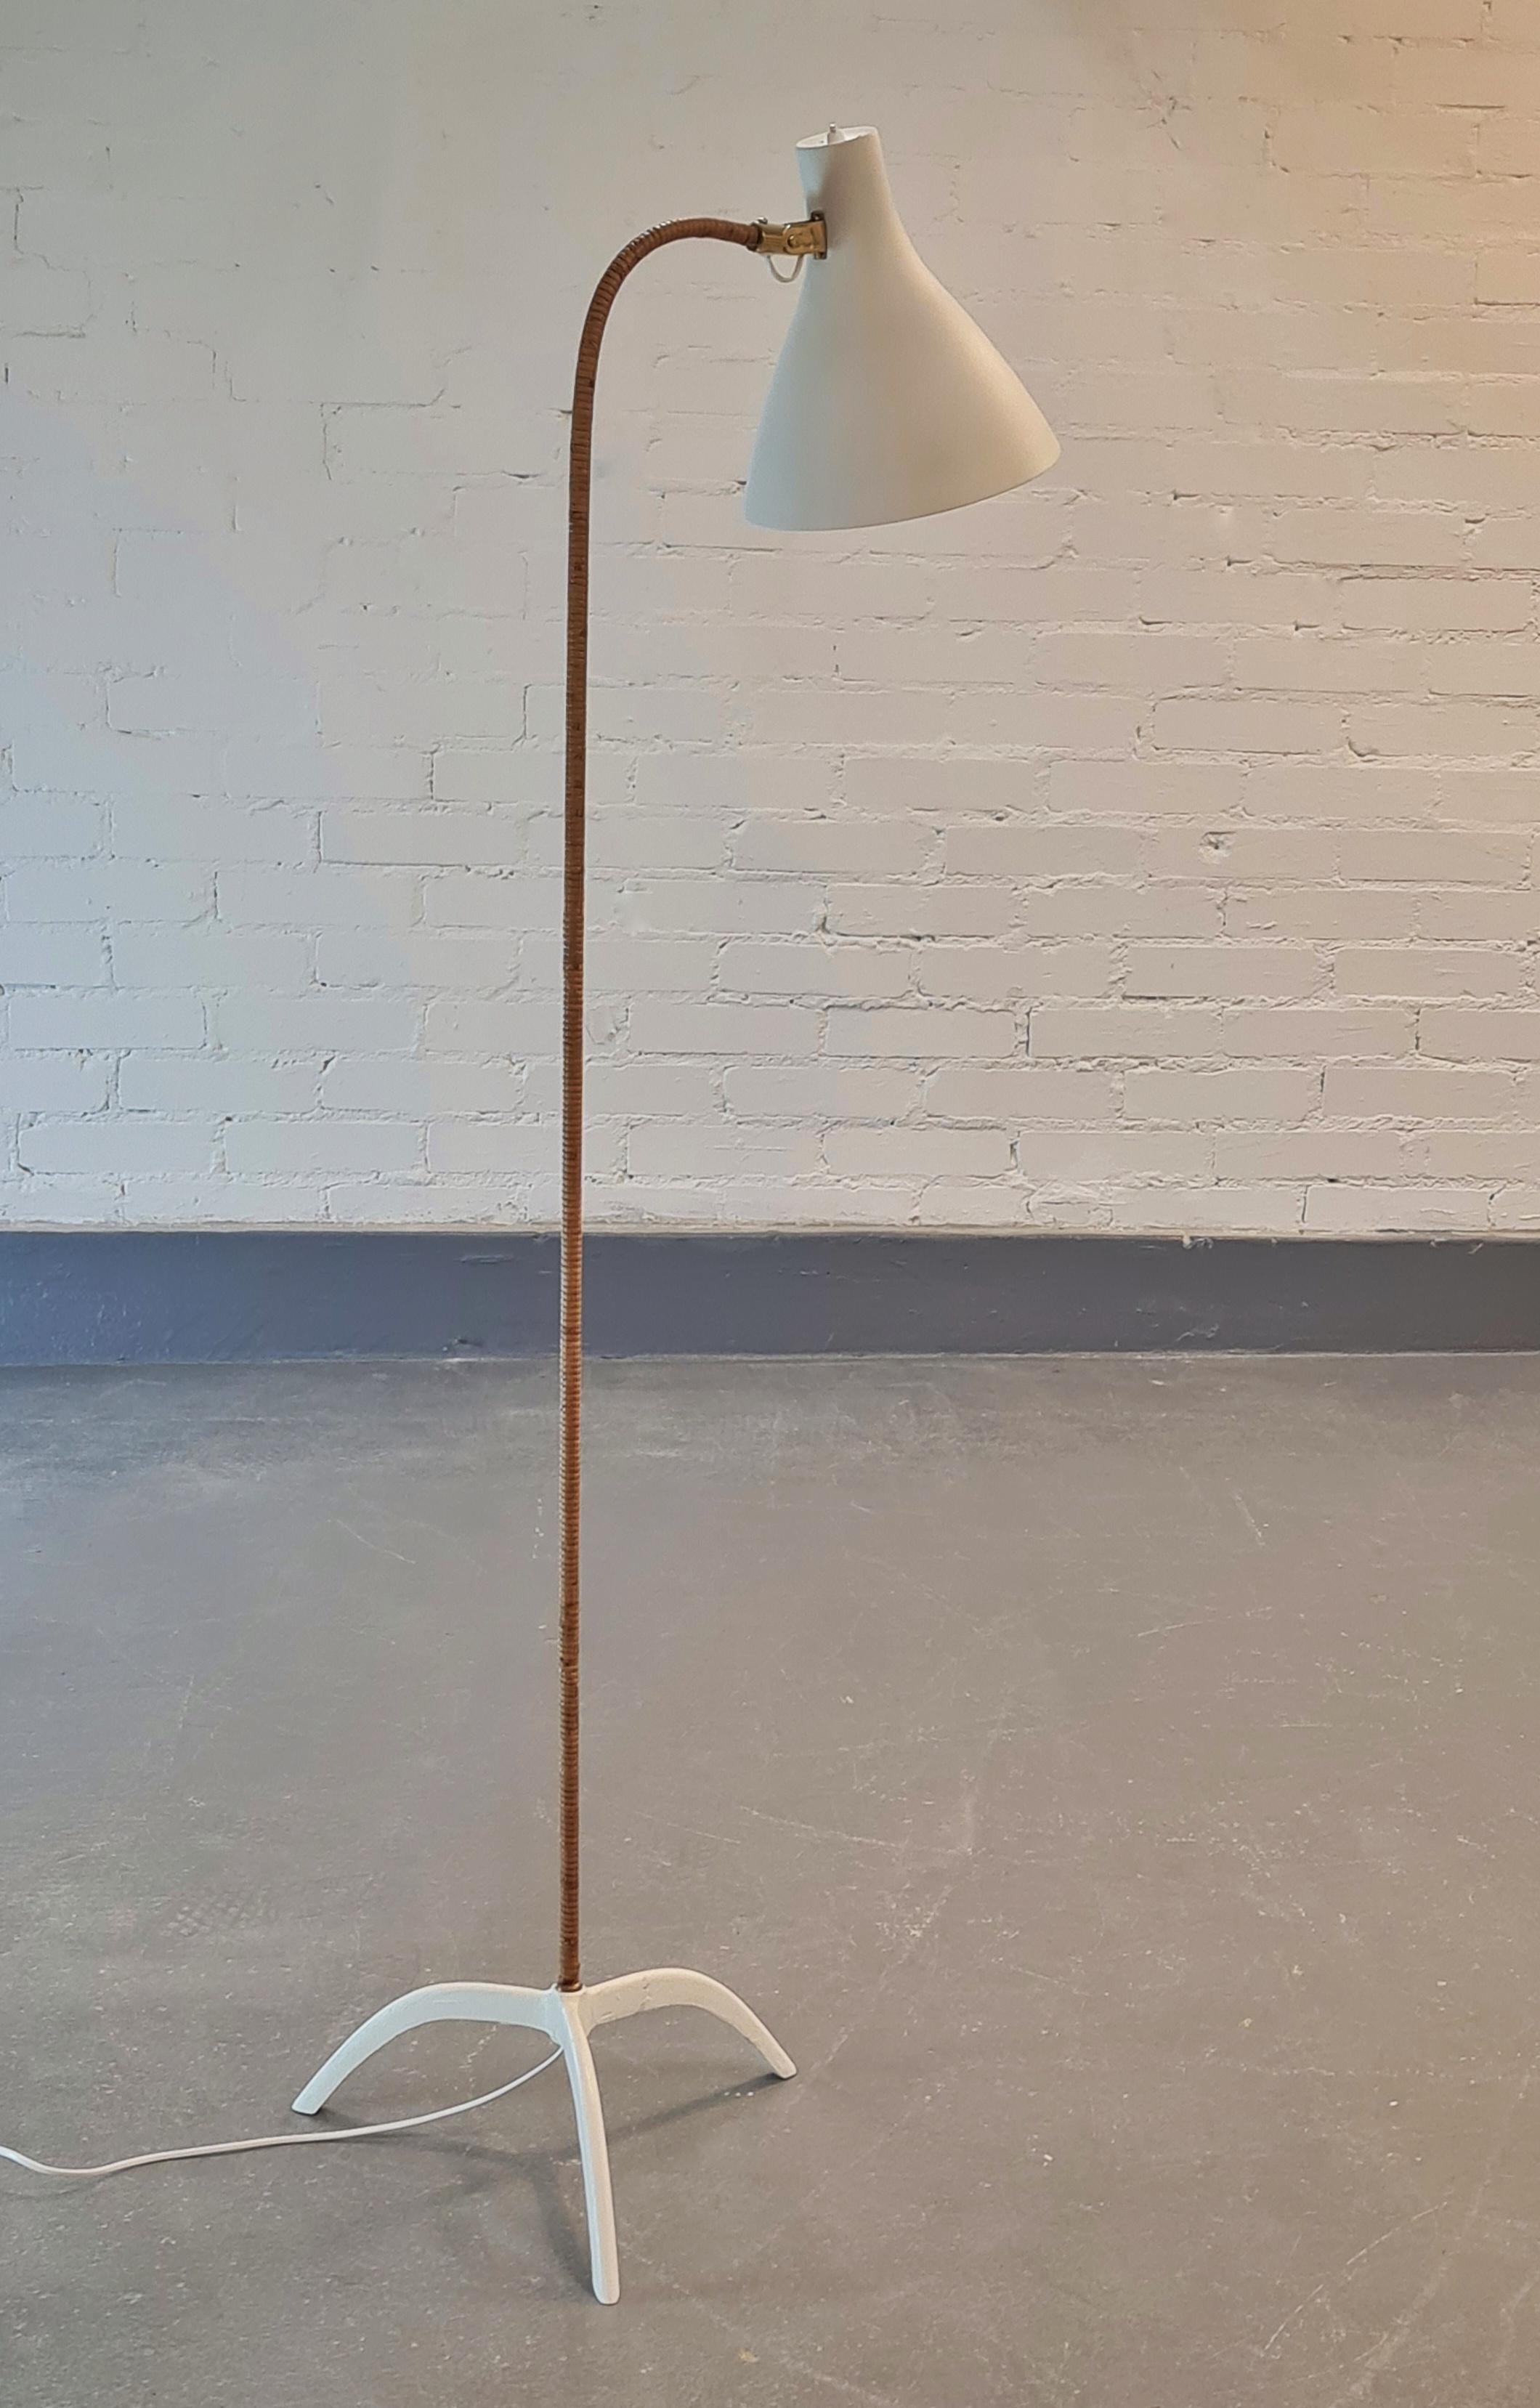 This Paavo Tynell floor lamp model number 9603 is from 1950's. 
It has a wide, white repainted funnel shape aluminum shade, diameter 25 cm, with a switch button. The shade is reversible. The light color rattan stem, which is curved from the top is